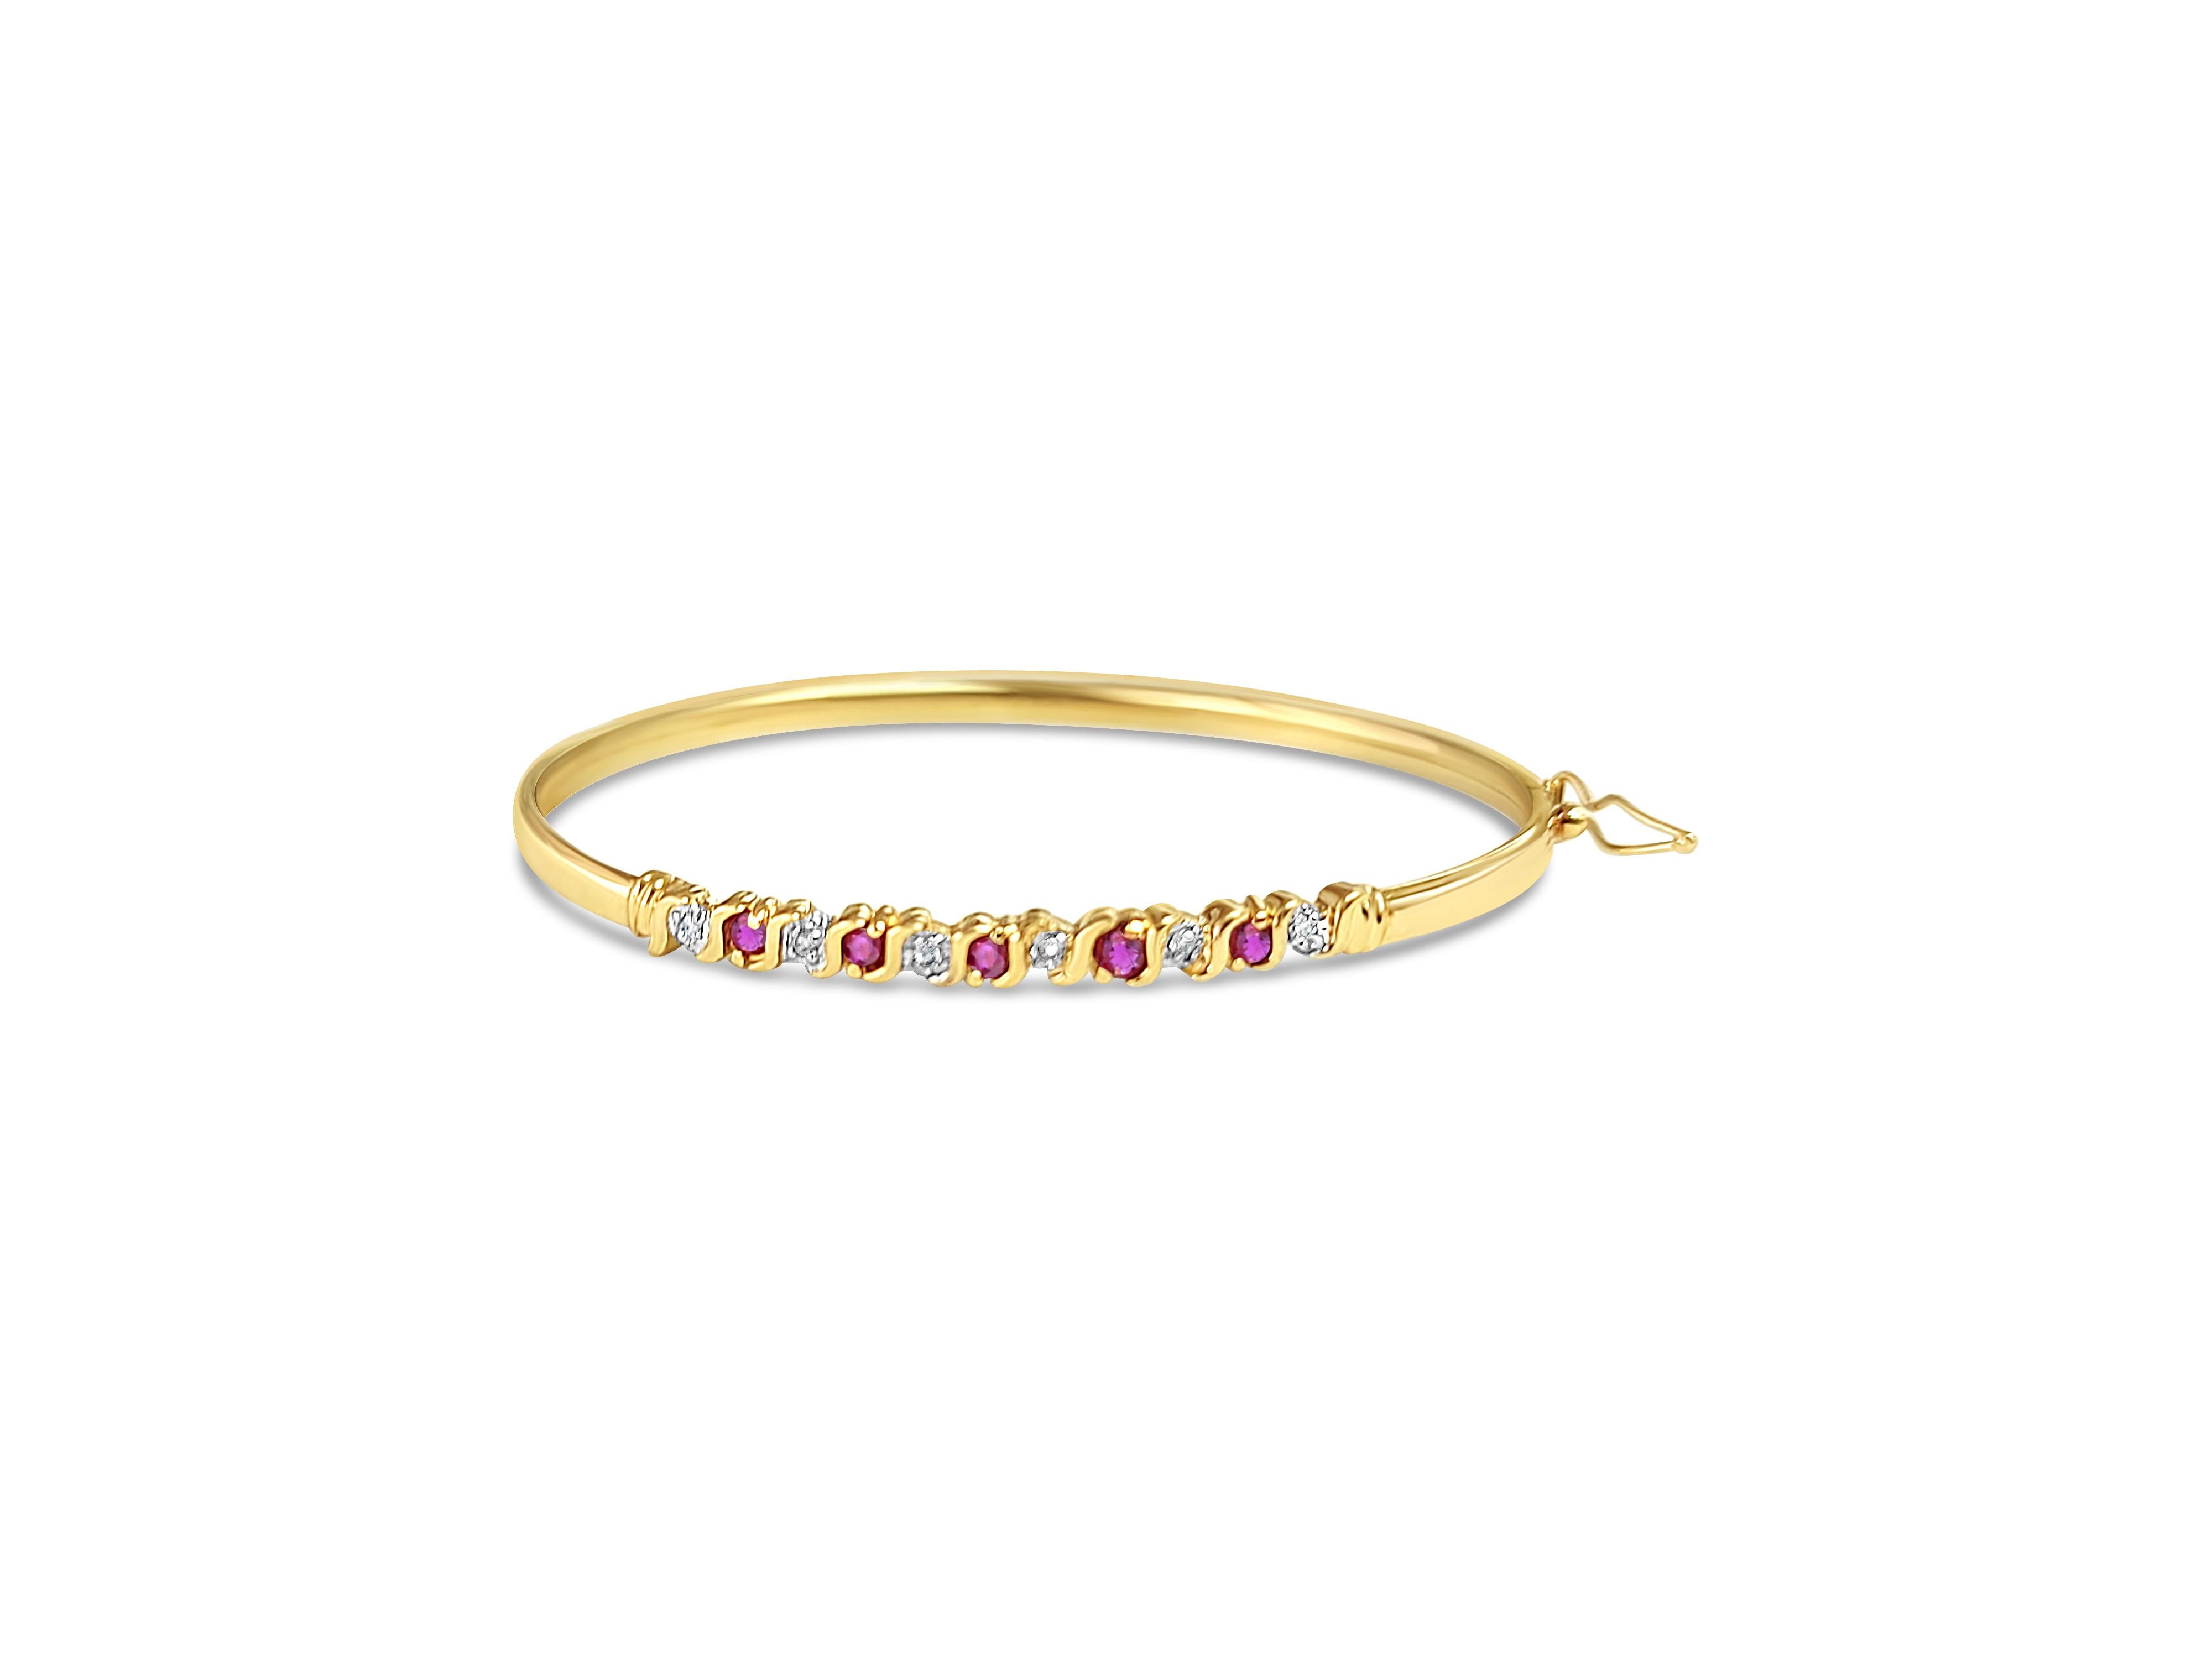 S Style Vintage Ruby Diamond Bangle 14k Yellow Gold In New Condition For Sale In Sugar Land, TX